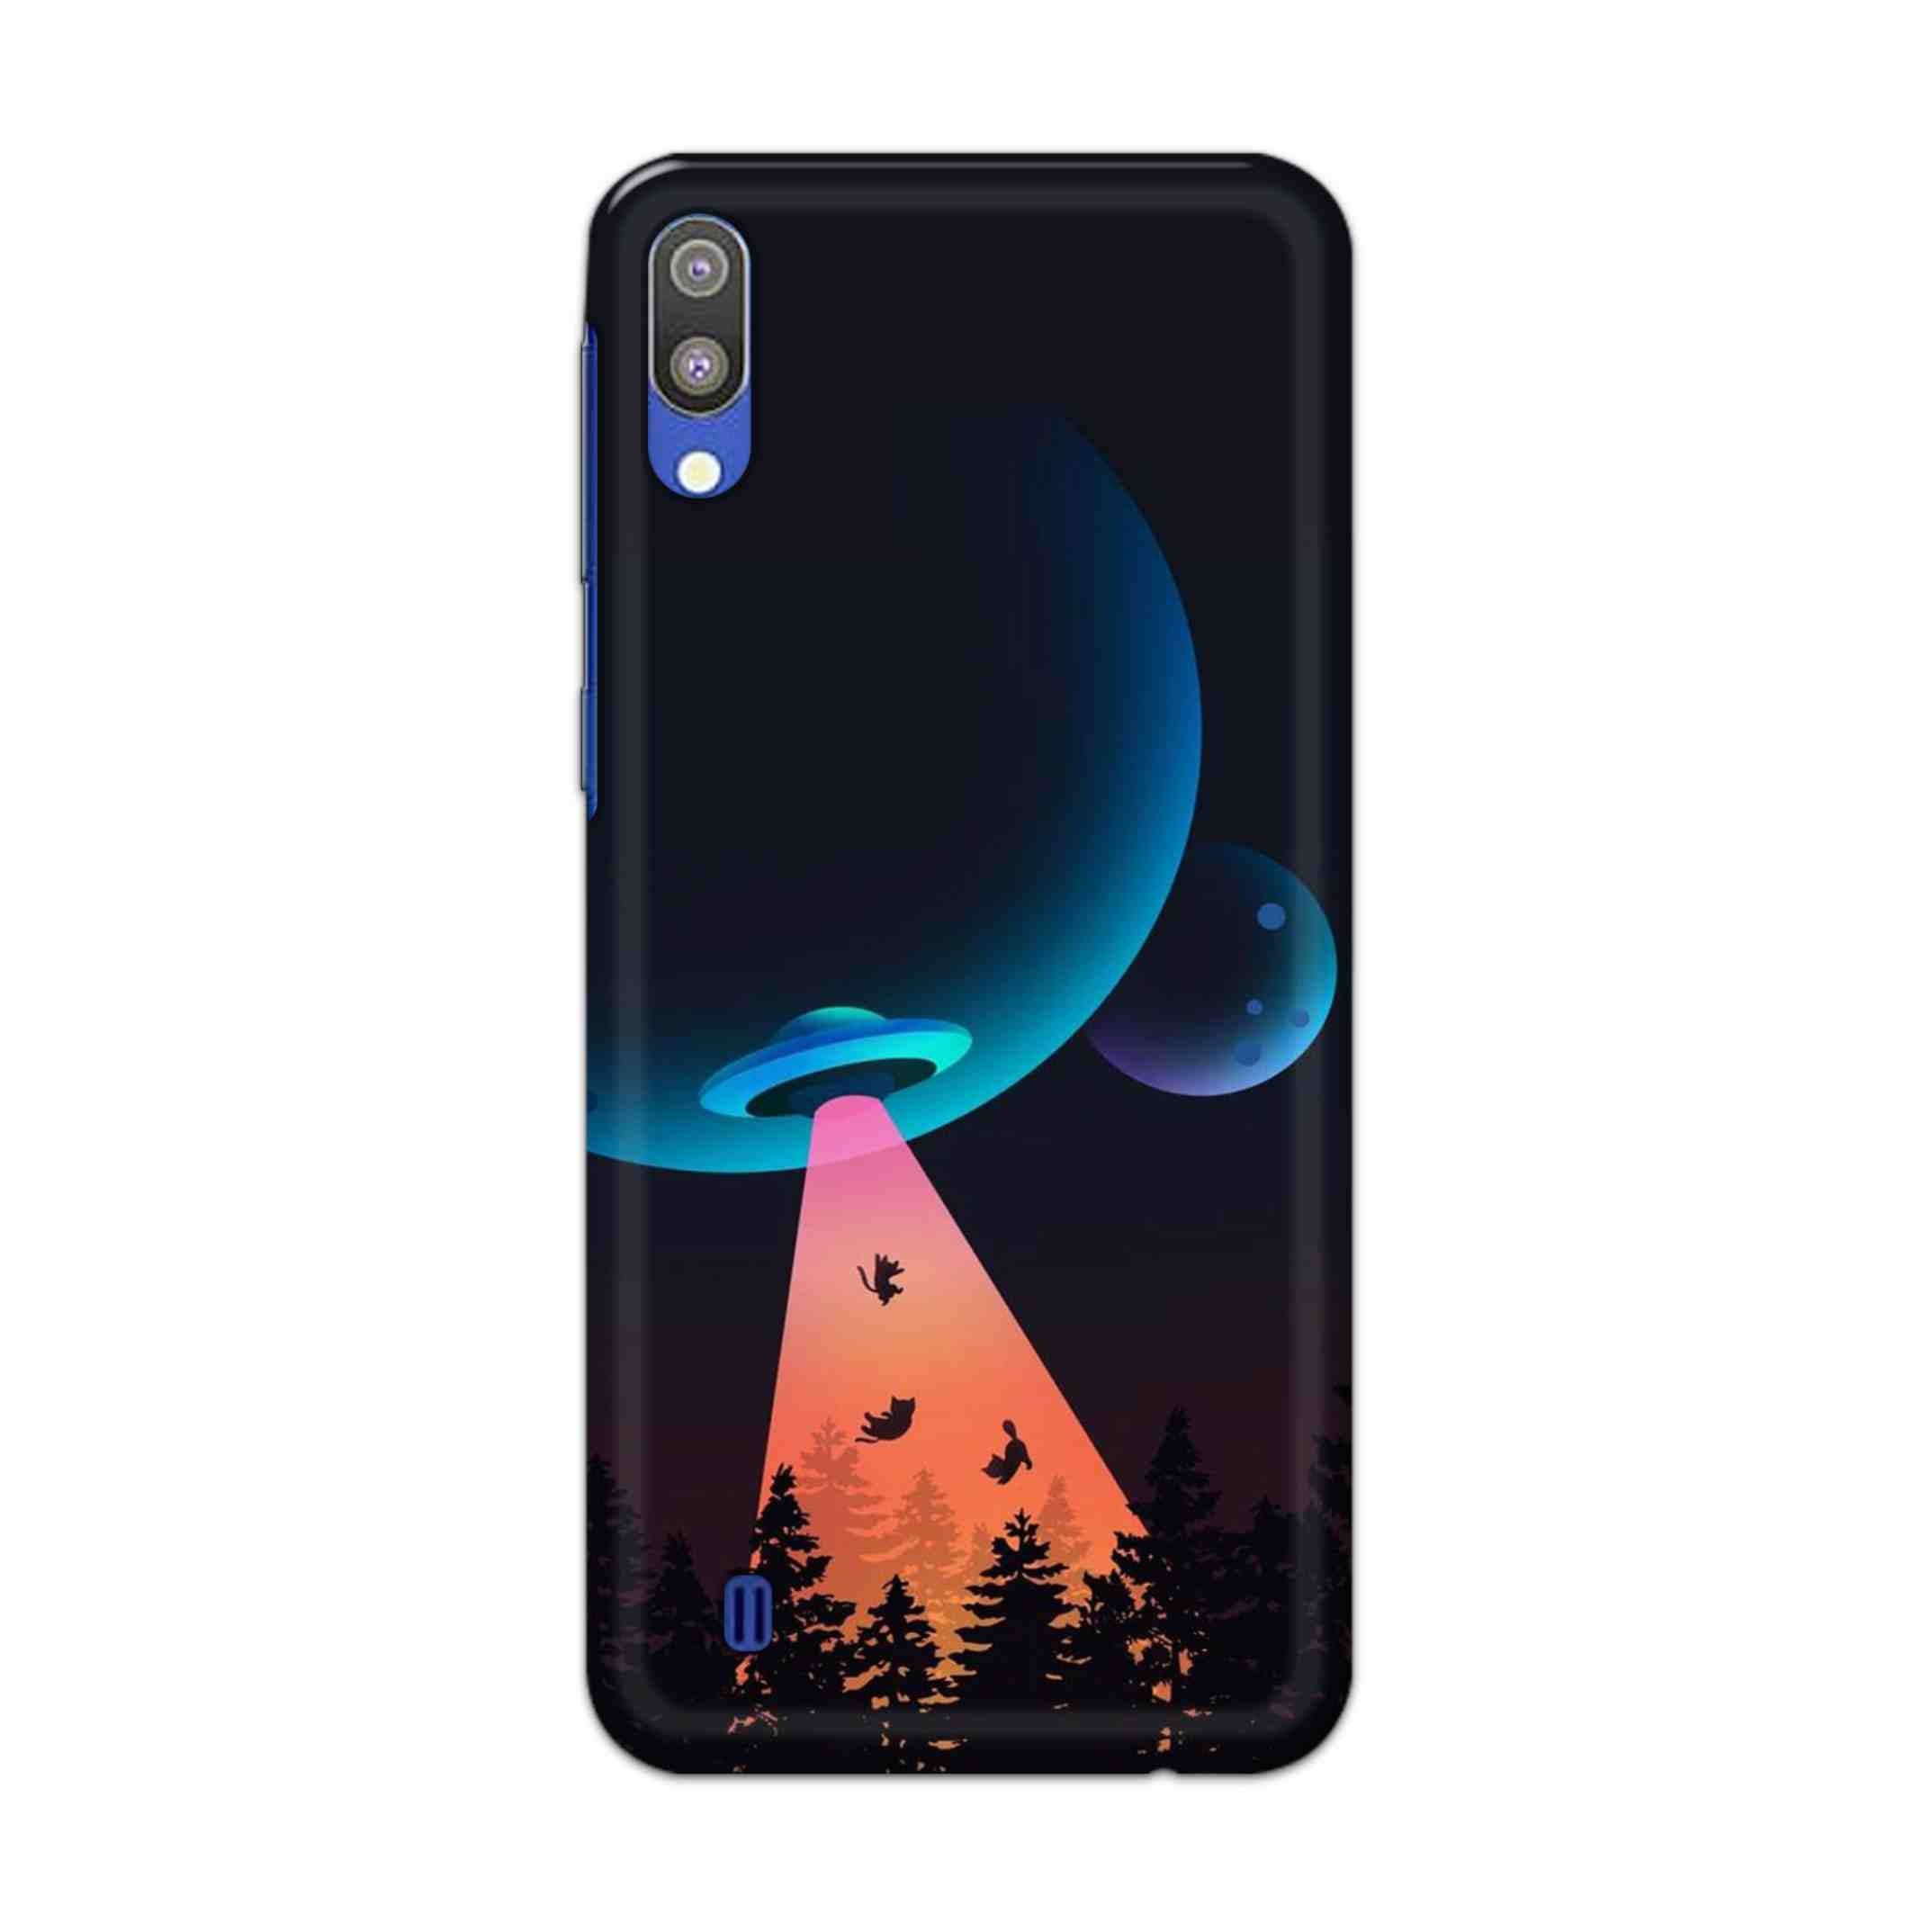 Buy Spaceship Hard Back Mobile Phone Case Cover For Samsung Galaxy M10 Online